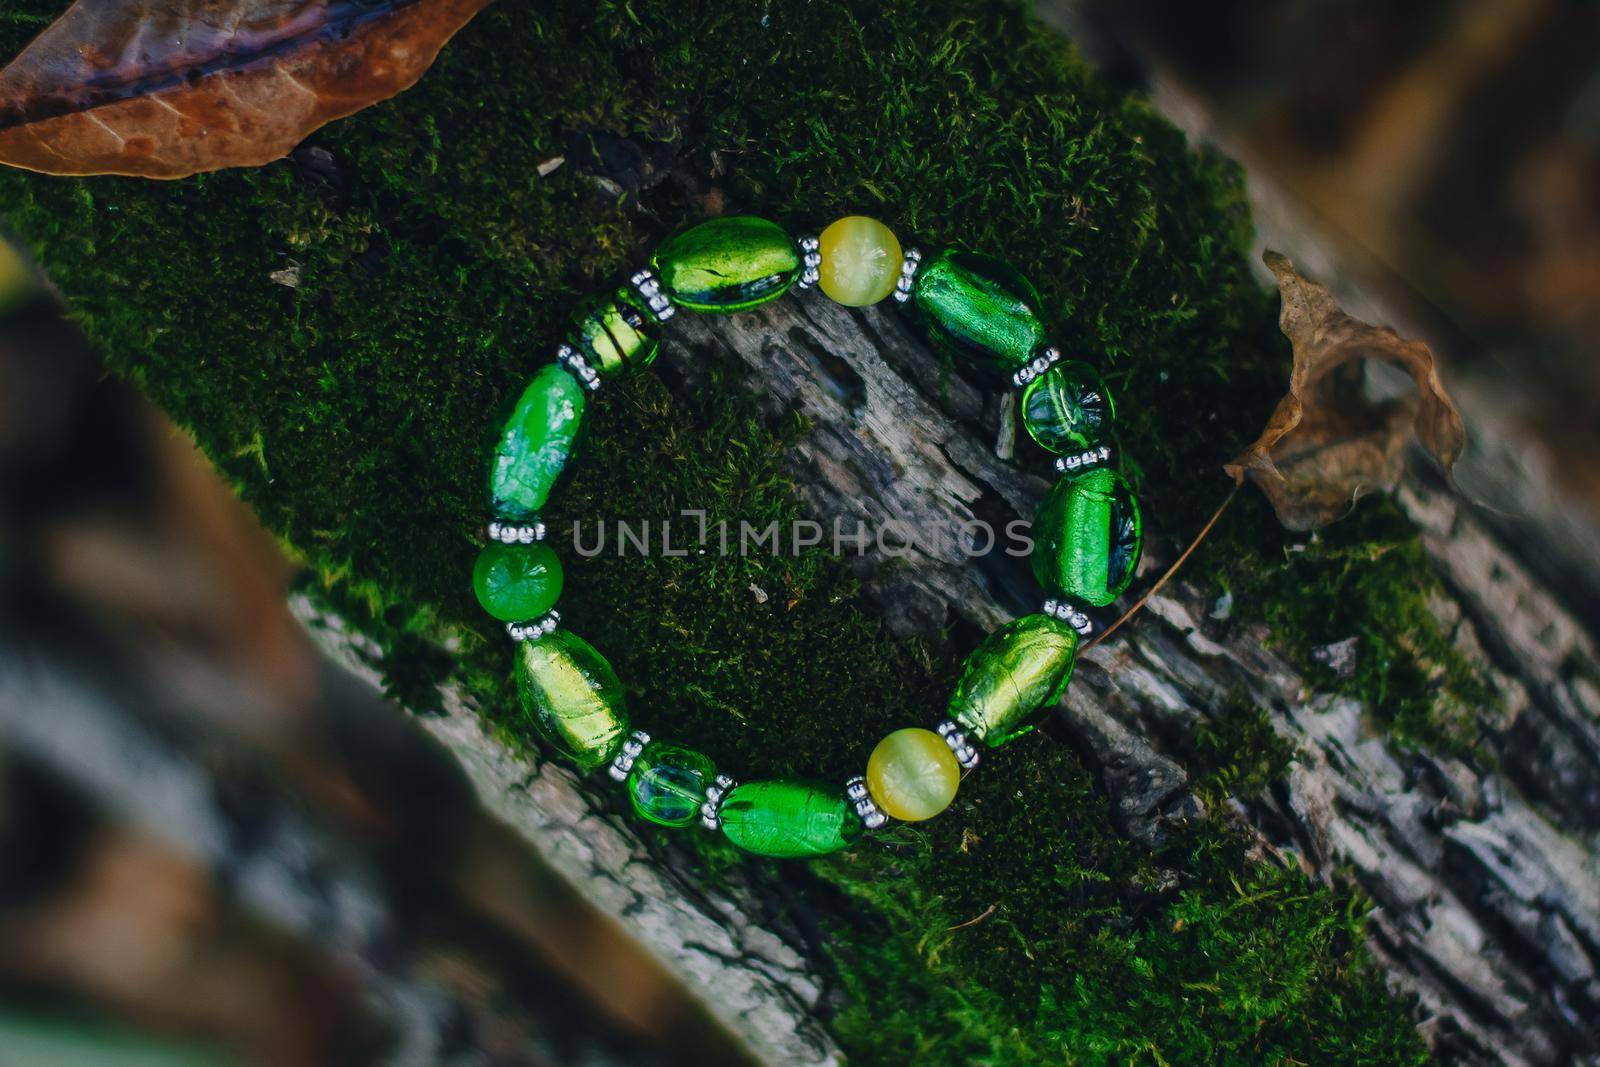 Bracelet handmade handcrafted do-it-yourself glass jewelry on natural wood forest background. Business idea, earning money for a hobby. Useful quarantined skills by mmp1206